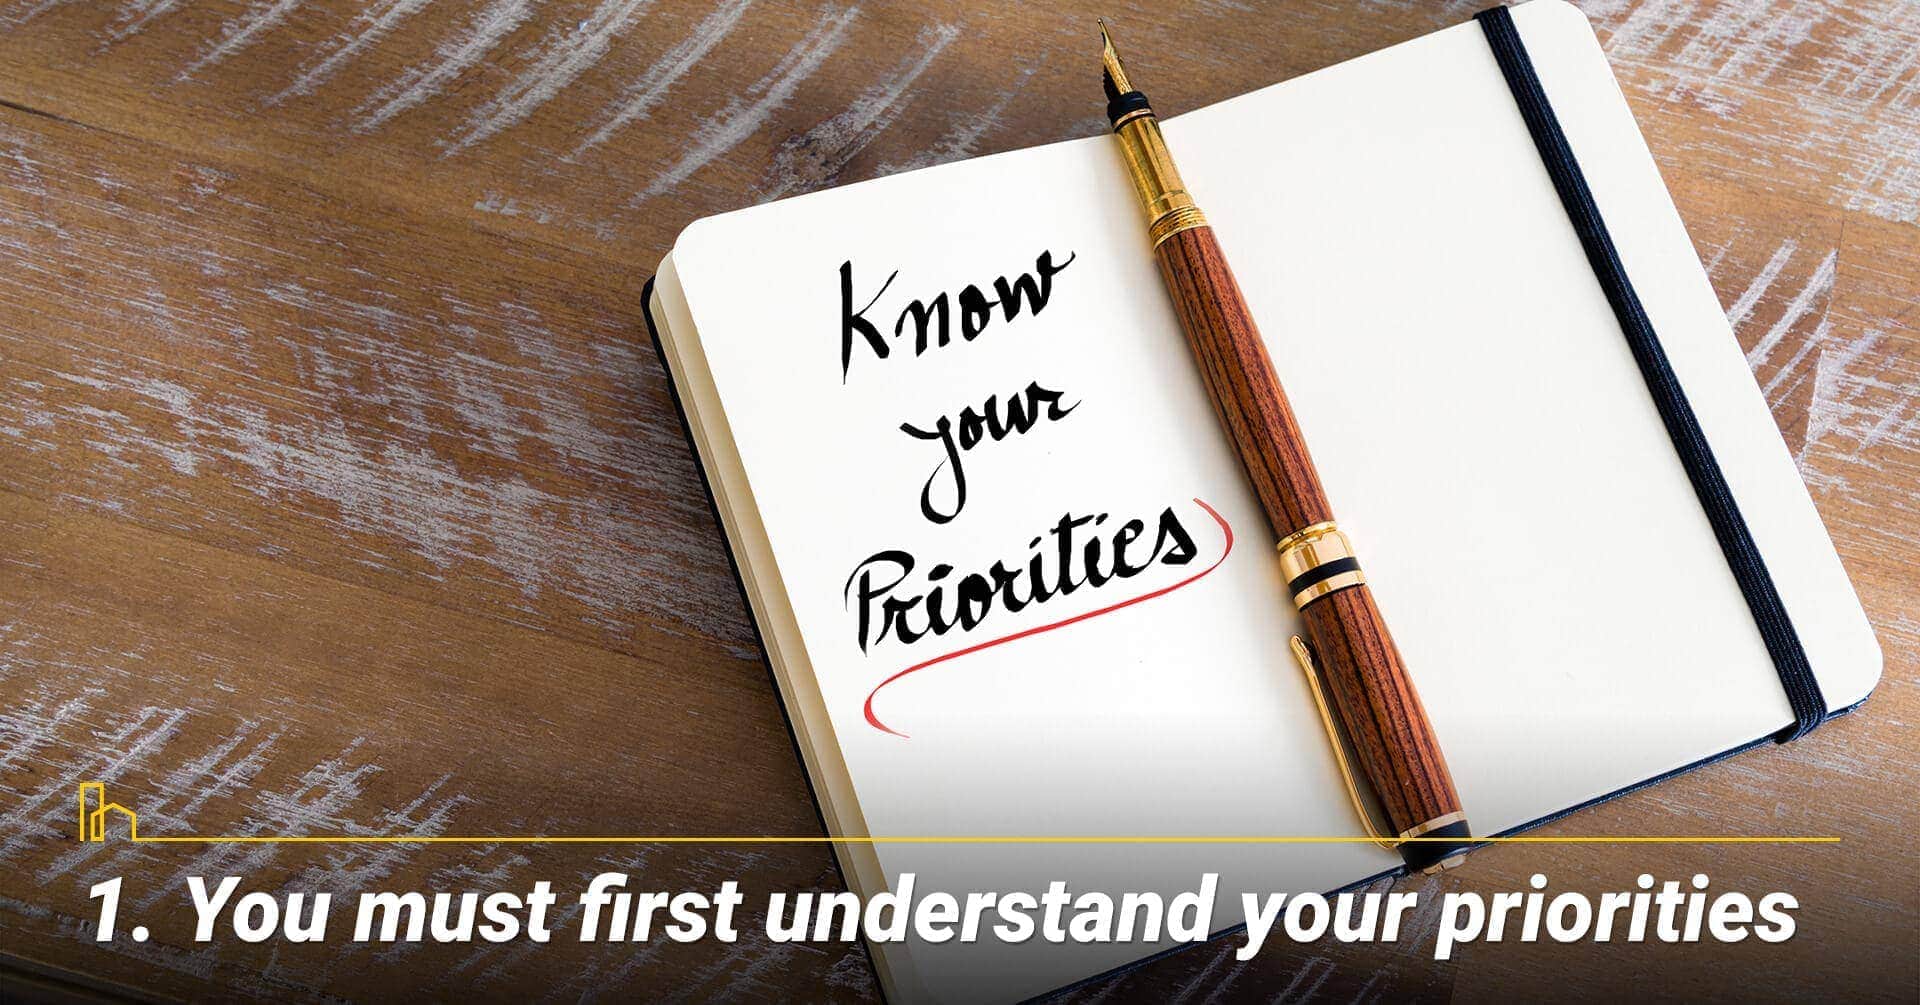 You must first understand your priorities, prioritize your needs